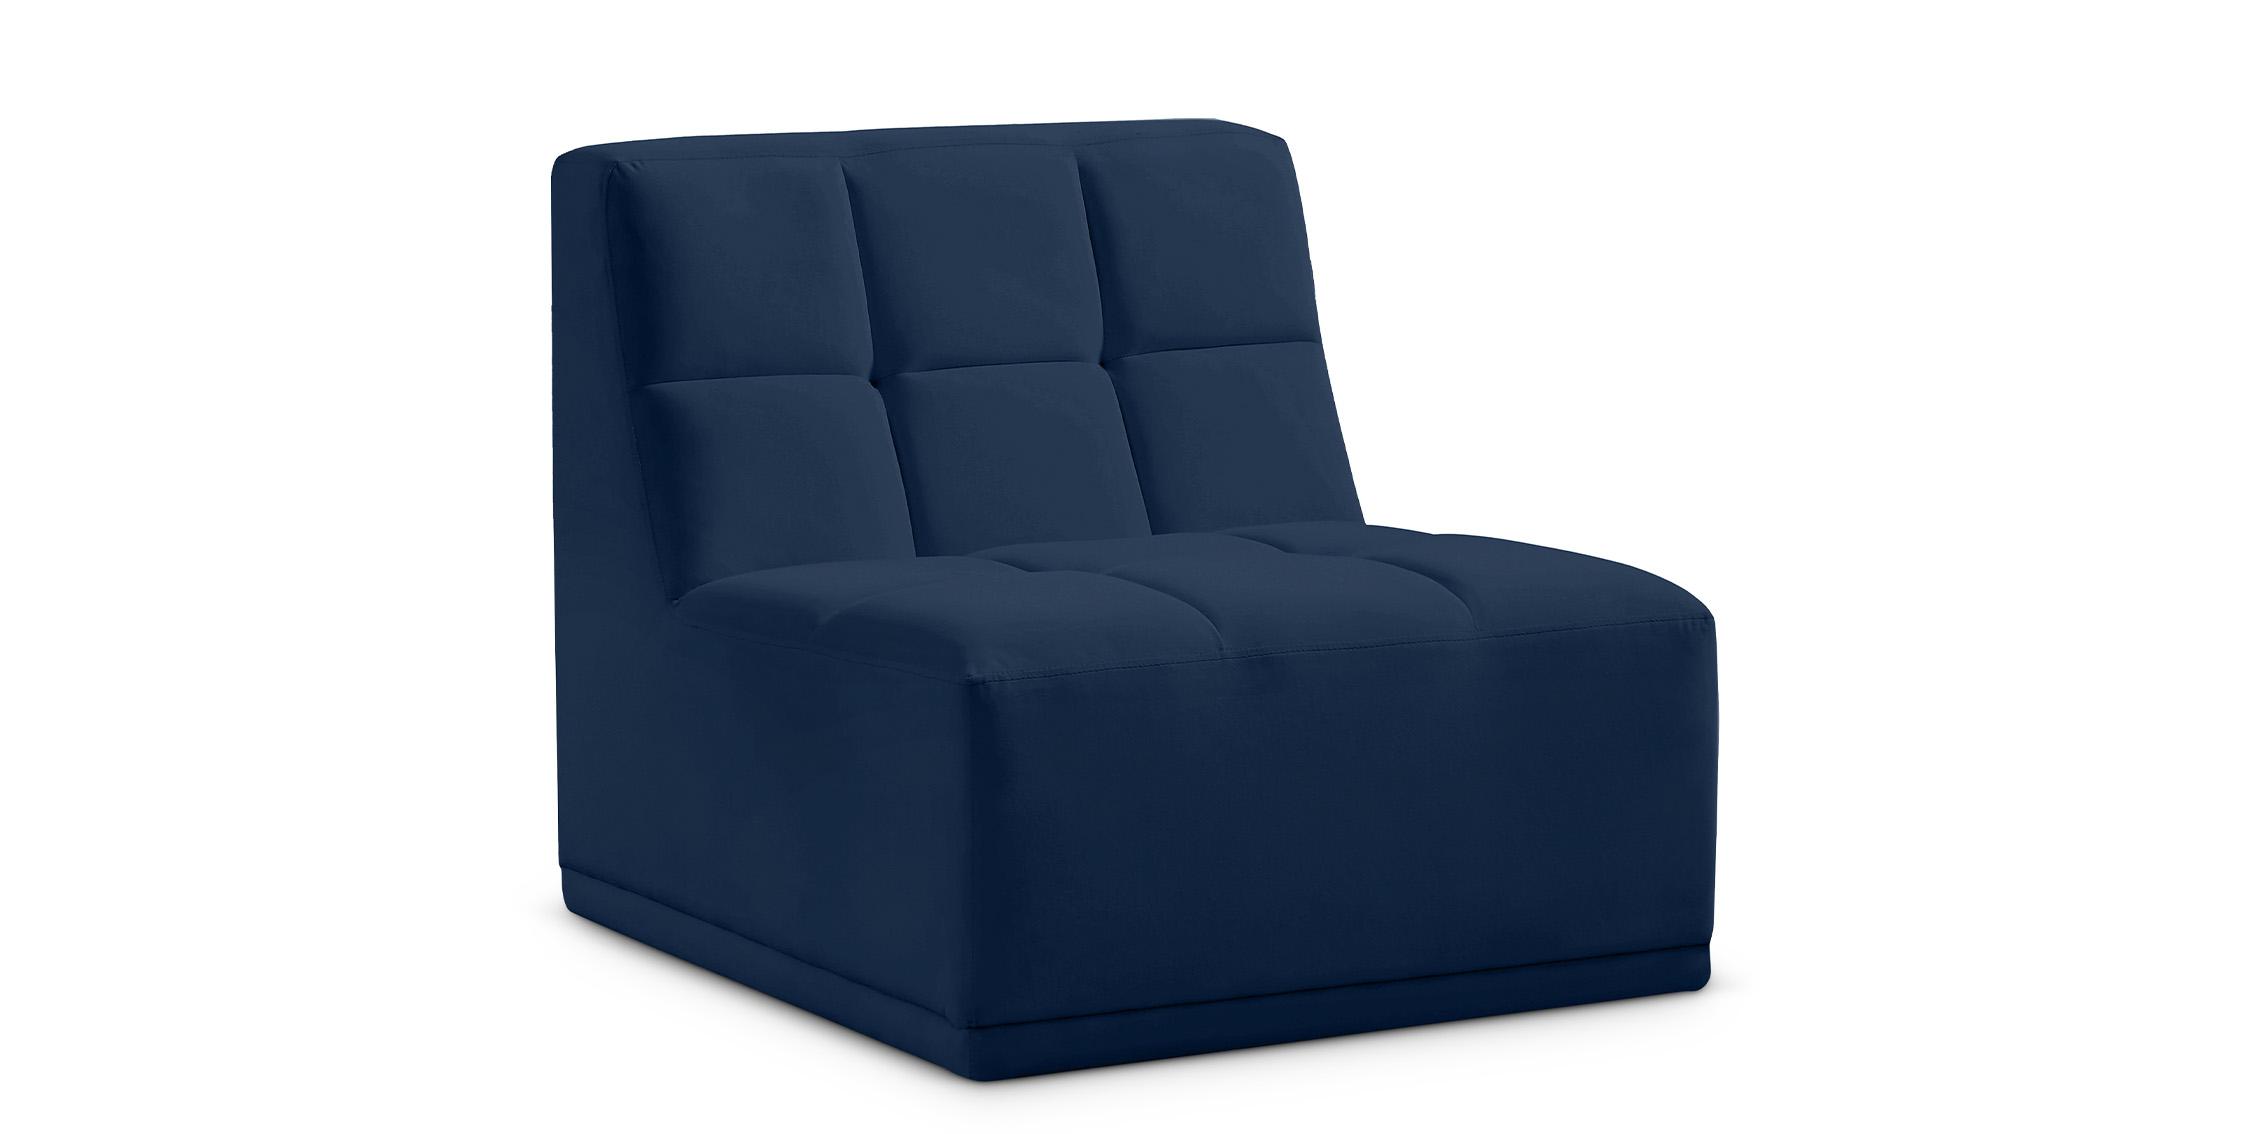   RELAX 650Navy-Armless  